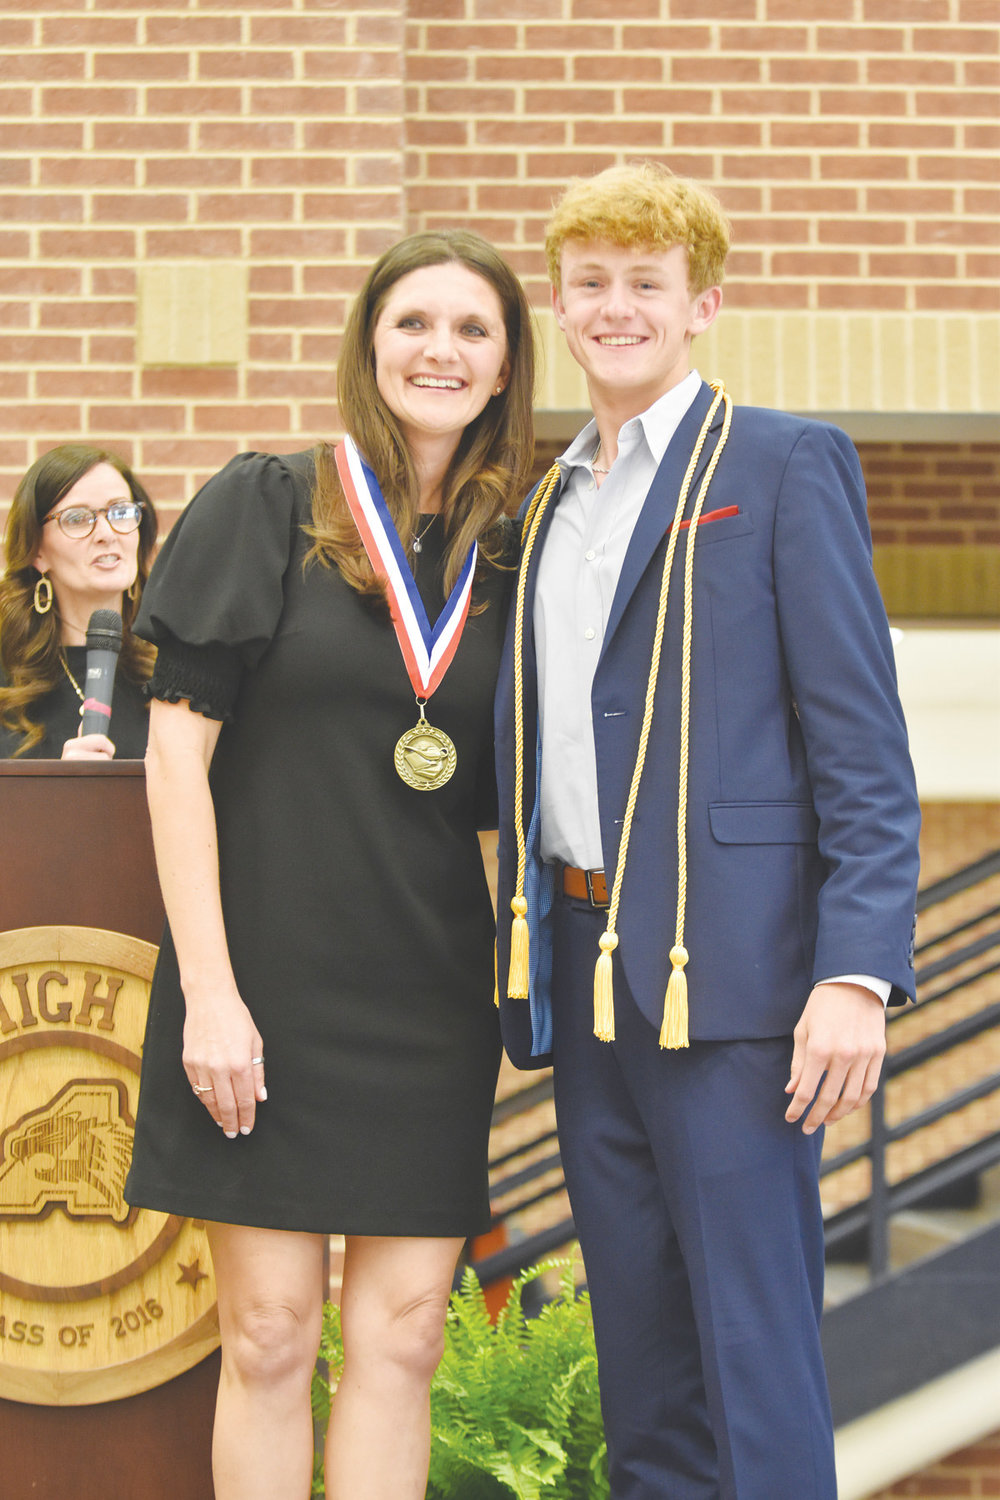 Jace Sims is the son of Trey and Brooke Sims. Jace plans to attend Texas A&M University and major in business finance in hopes to own his own business one day. He honored Mrs. Jamie Rinehart.